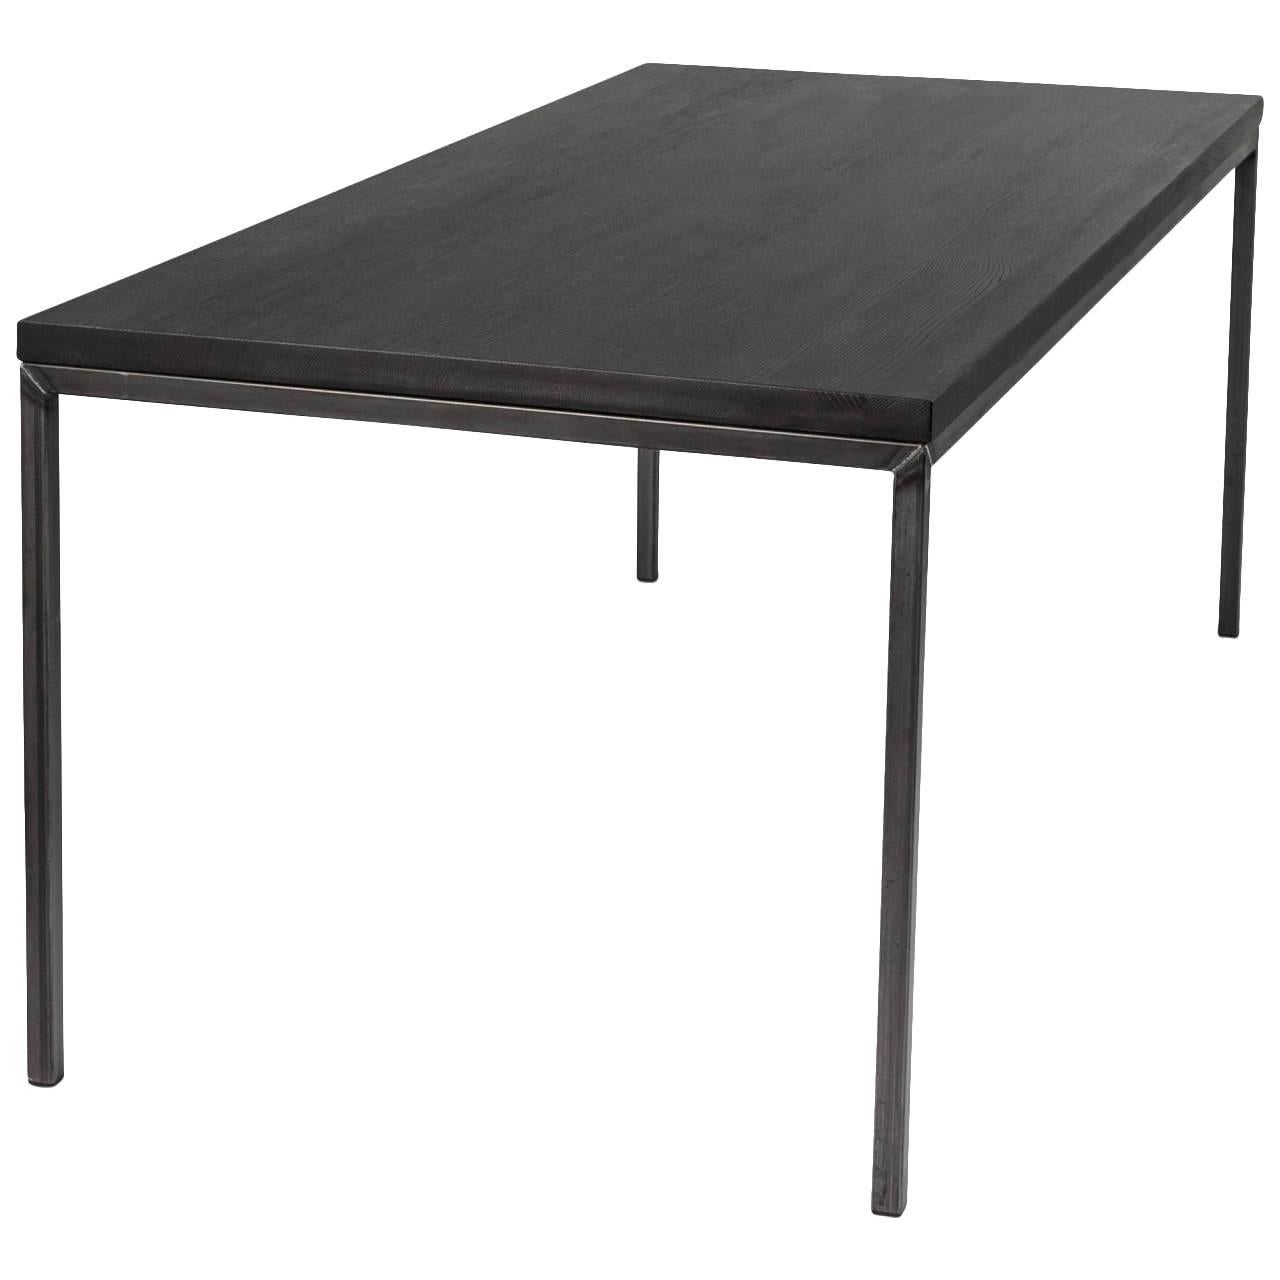 Dining Room Table "NO 02" by Manufacturer WUUD in Oak Wood and Steel (220 cm) For Sale